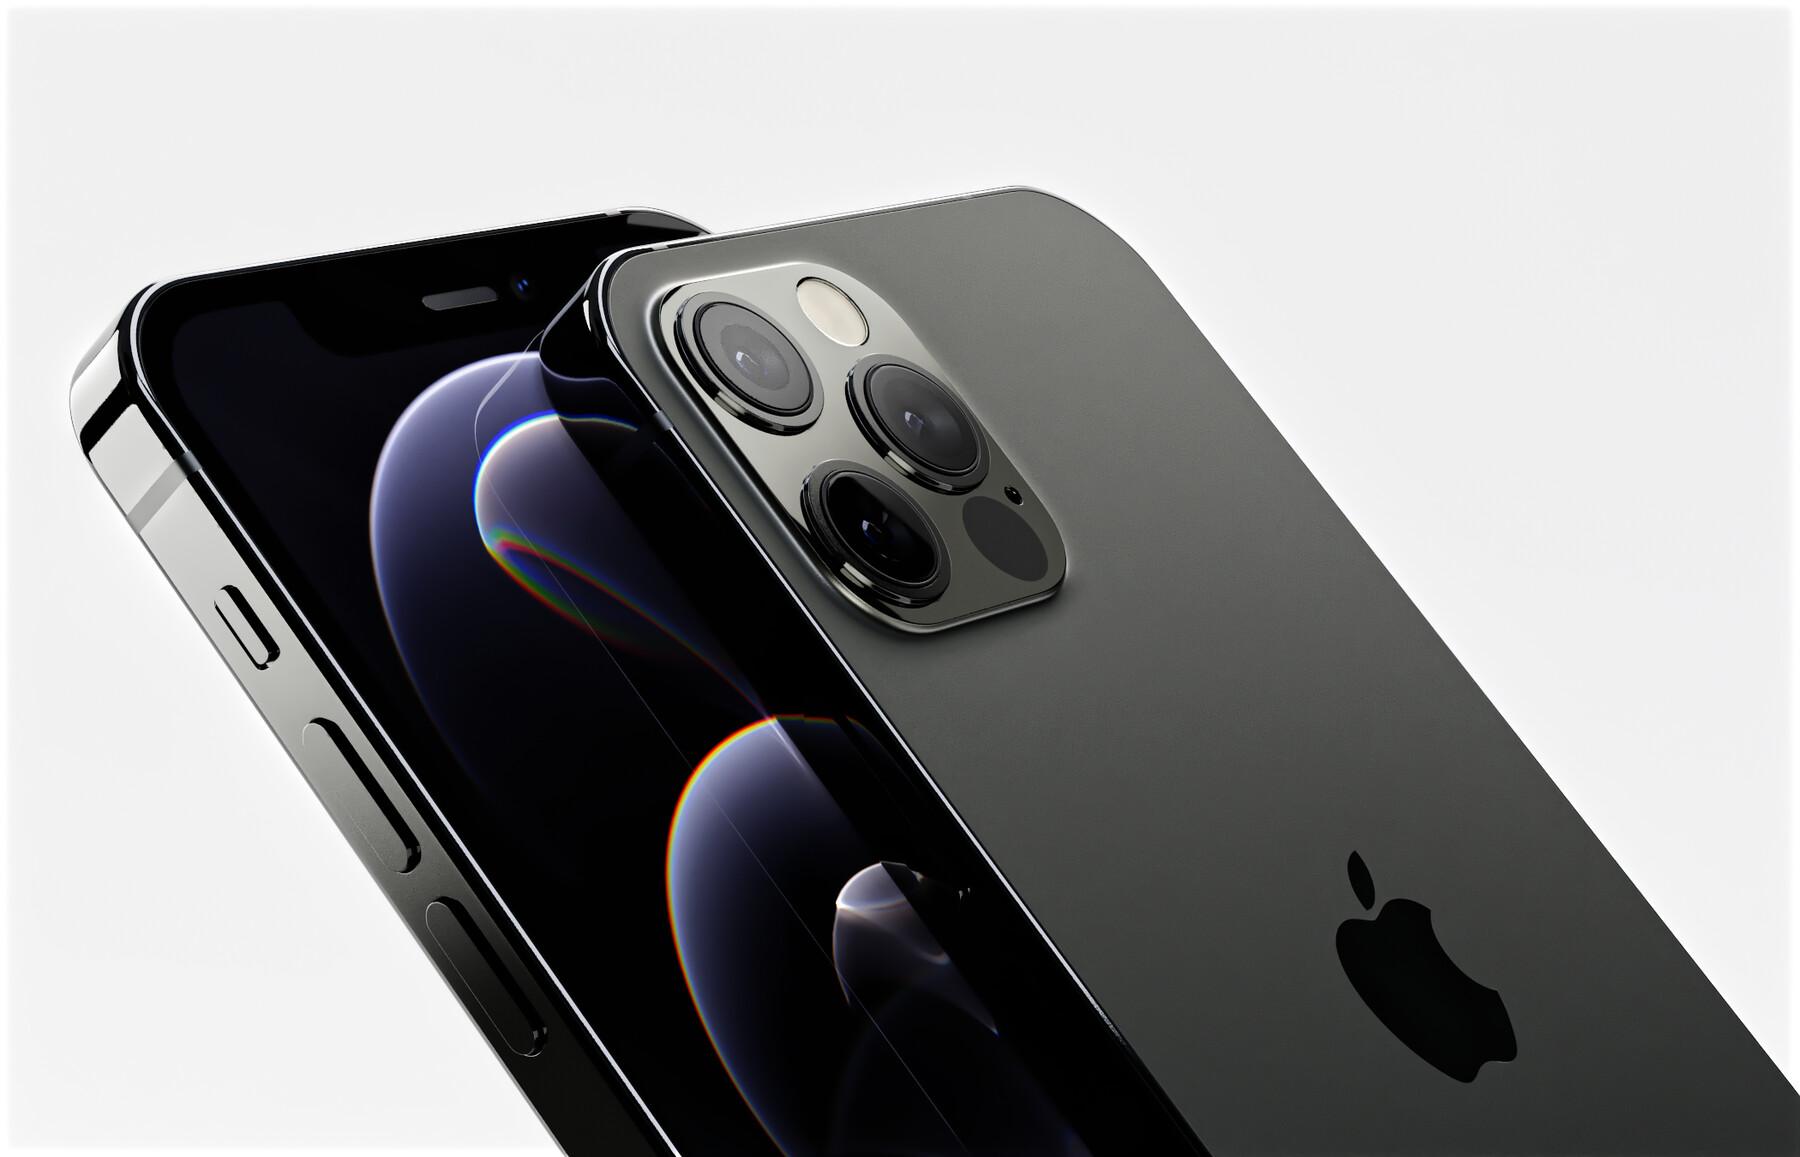 ArtStation - iPhone 12 Pro and iPhone 12 Pro Max All Official Colors